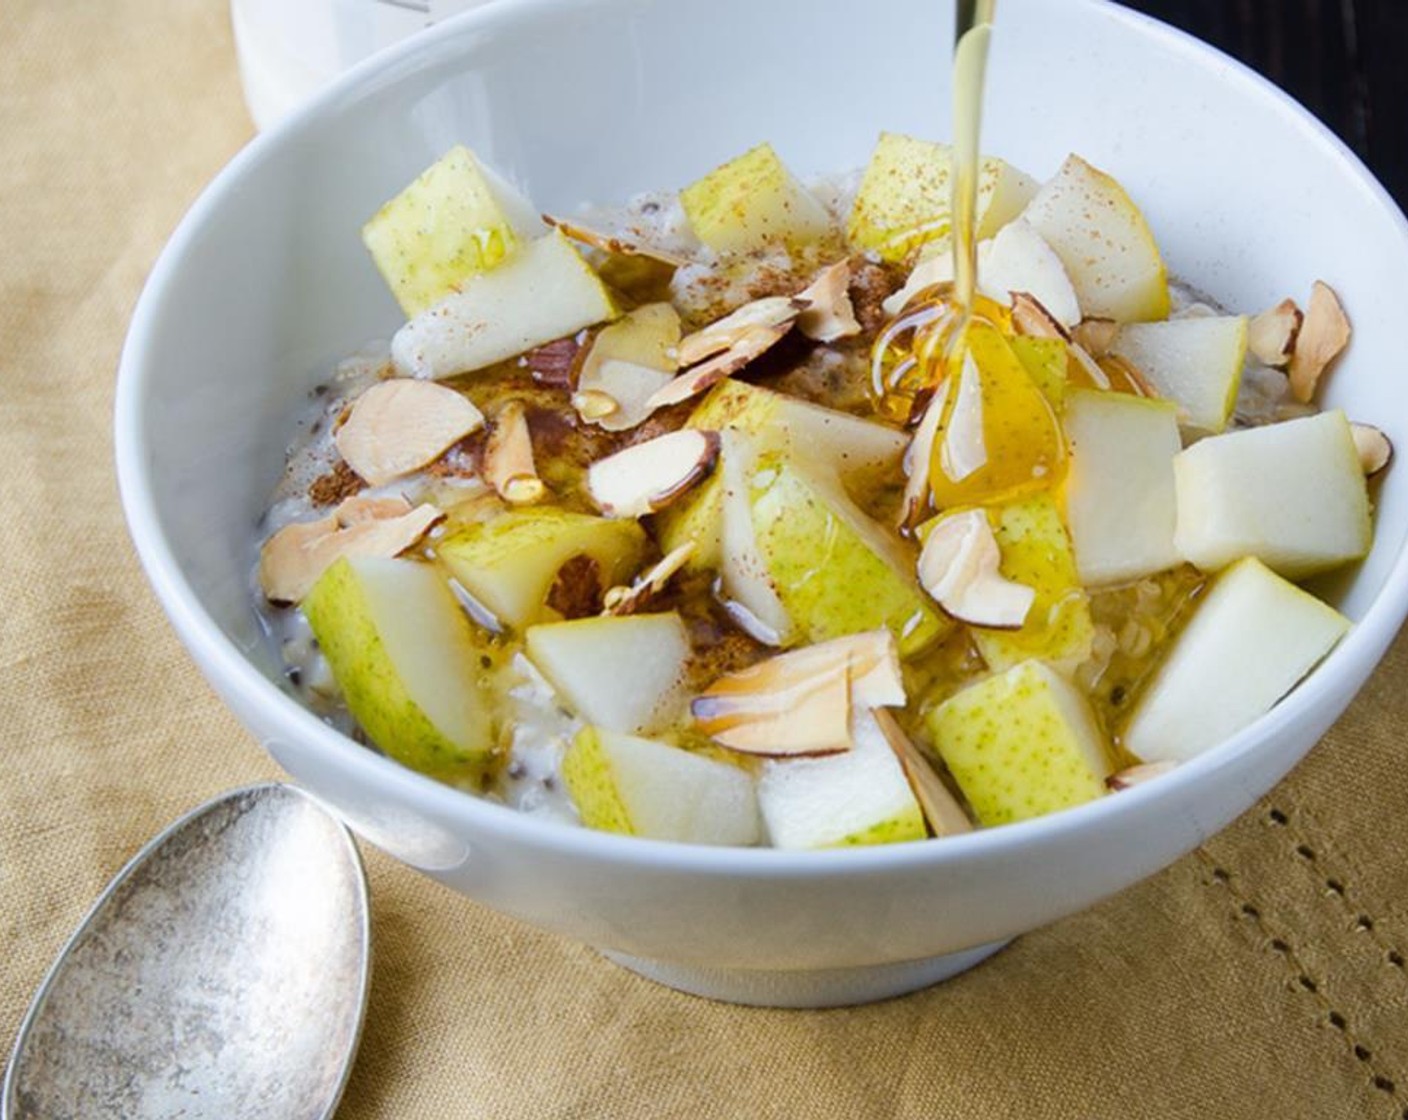 step 4 For vanilla pear almond topping: Dice the Pear (1/2). Dress your oats with Vanilla Extract (1/8 tsp), pears, Ground Cinnamon (1 dash), Honey (1 Tbsp) and toasted Almonds (1 Tbsp).